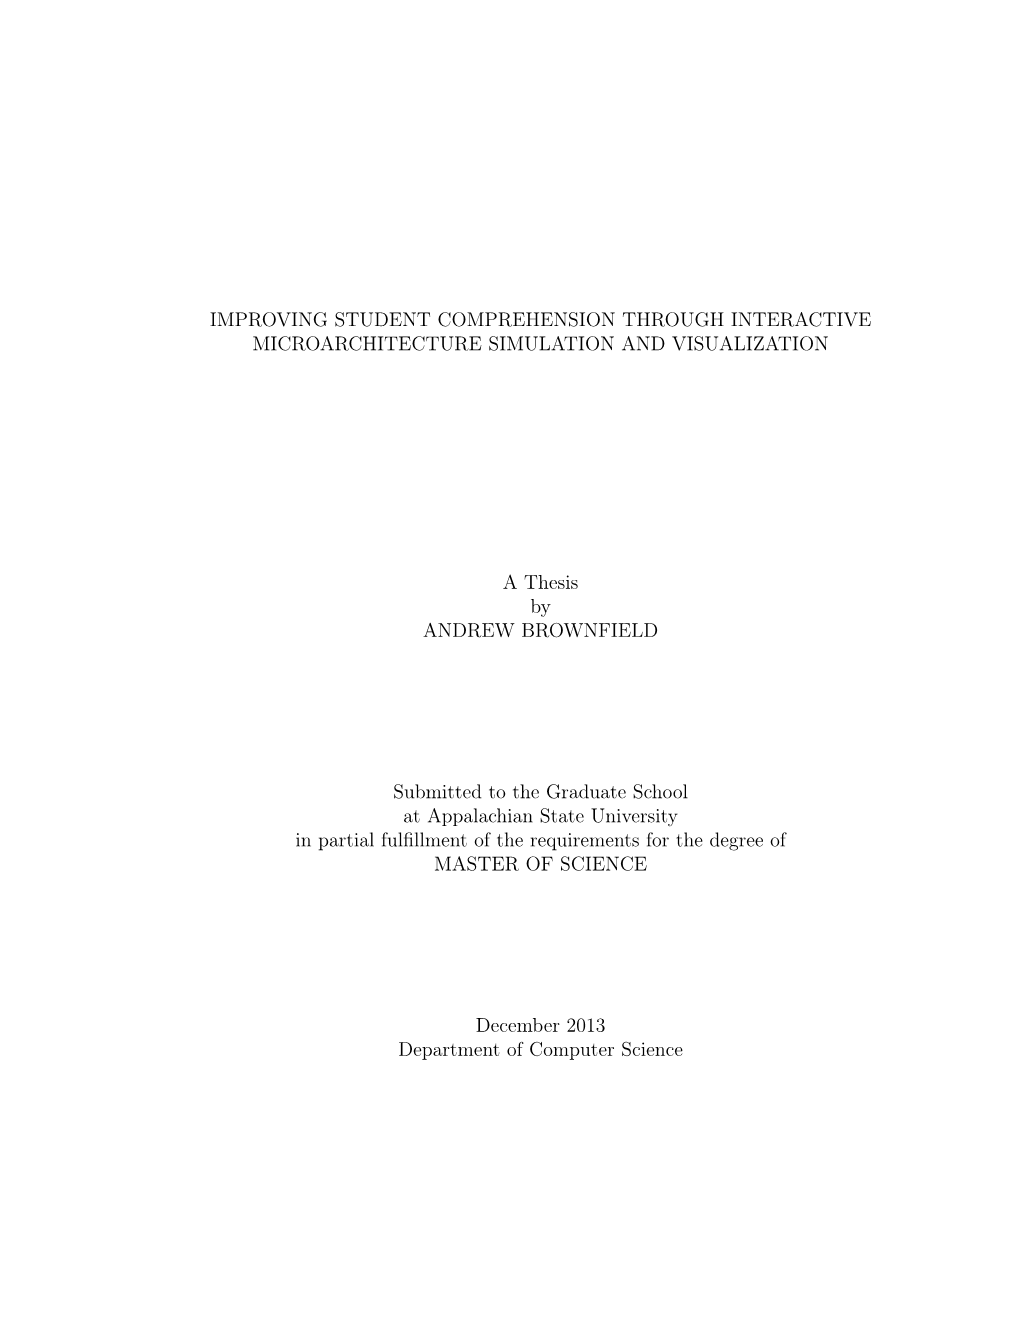 Brownfield, Andrew 2013 Thesis.Pdf